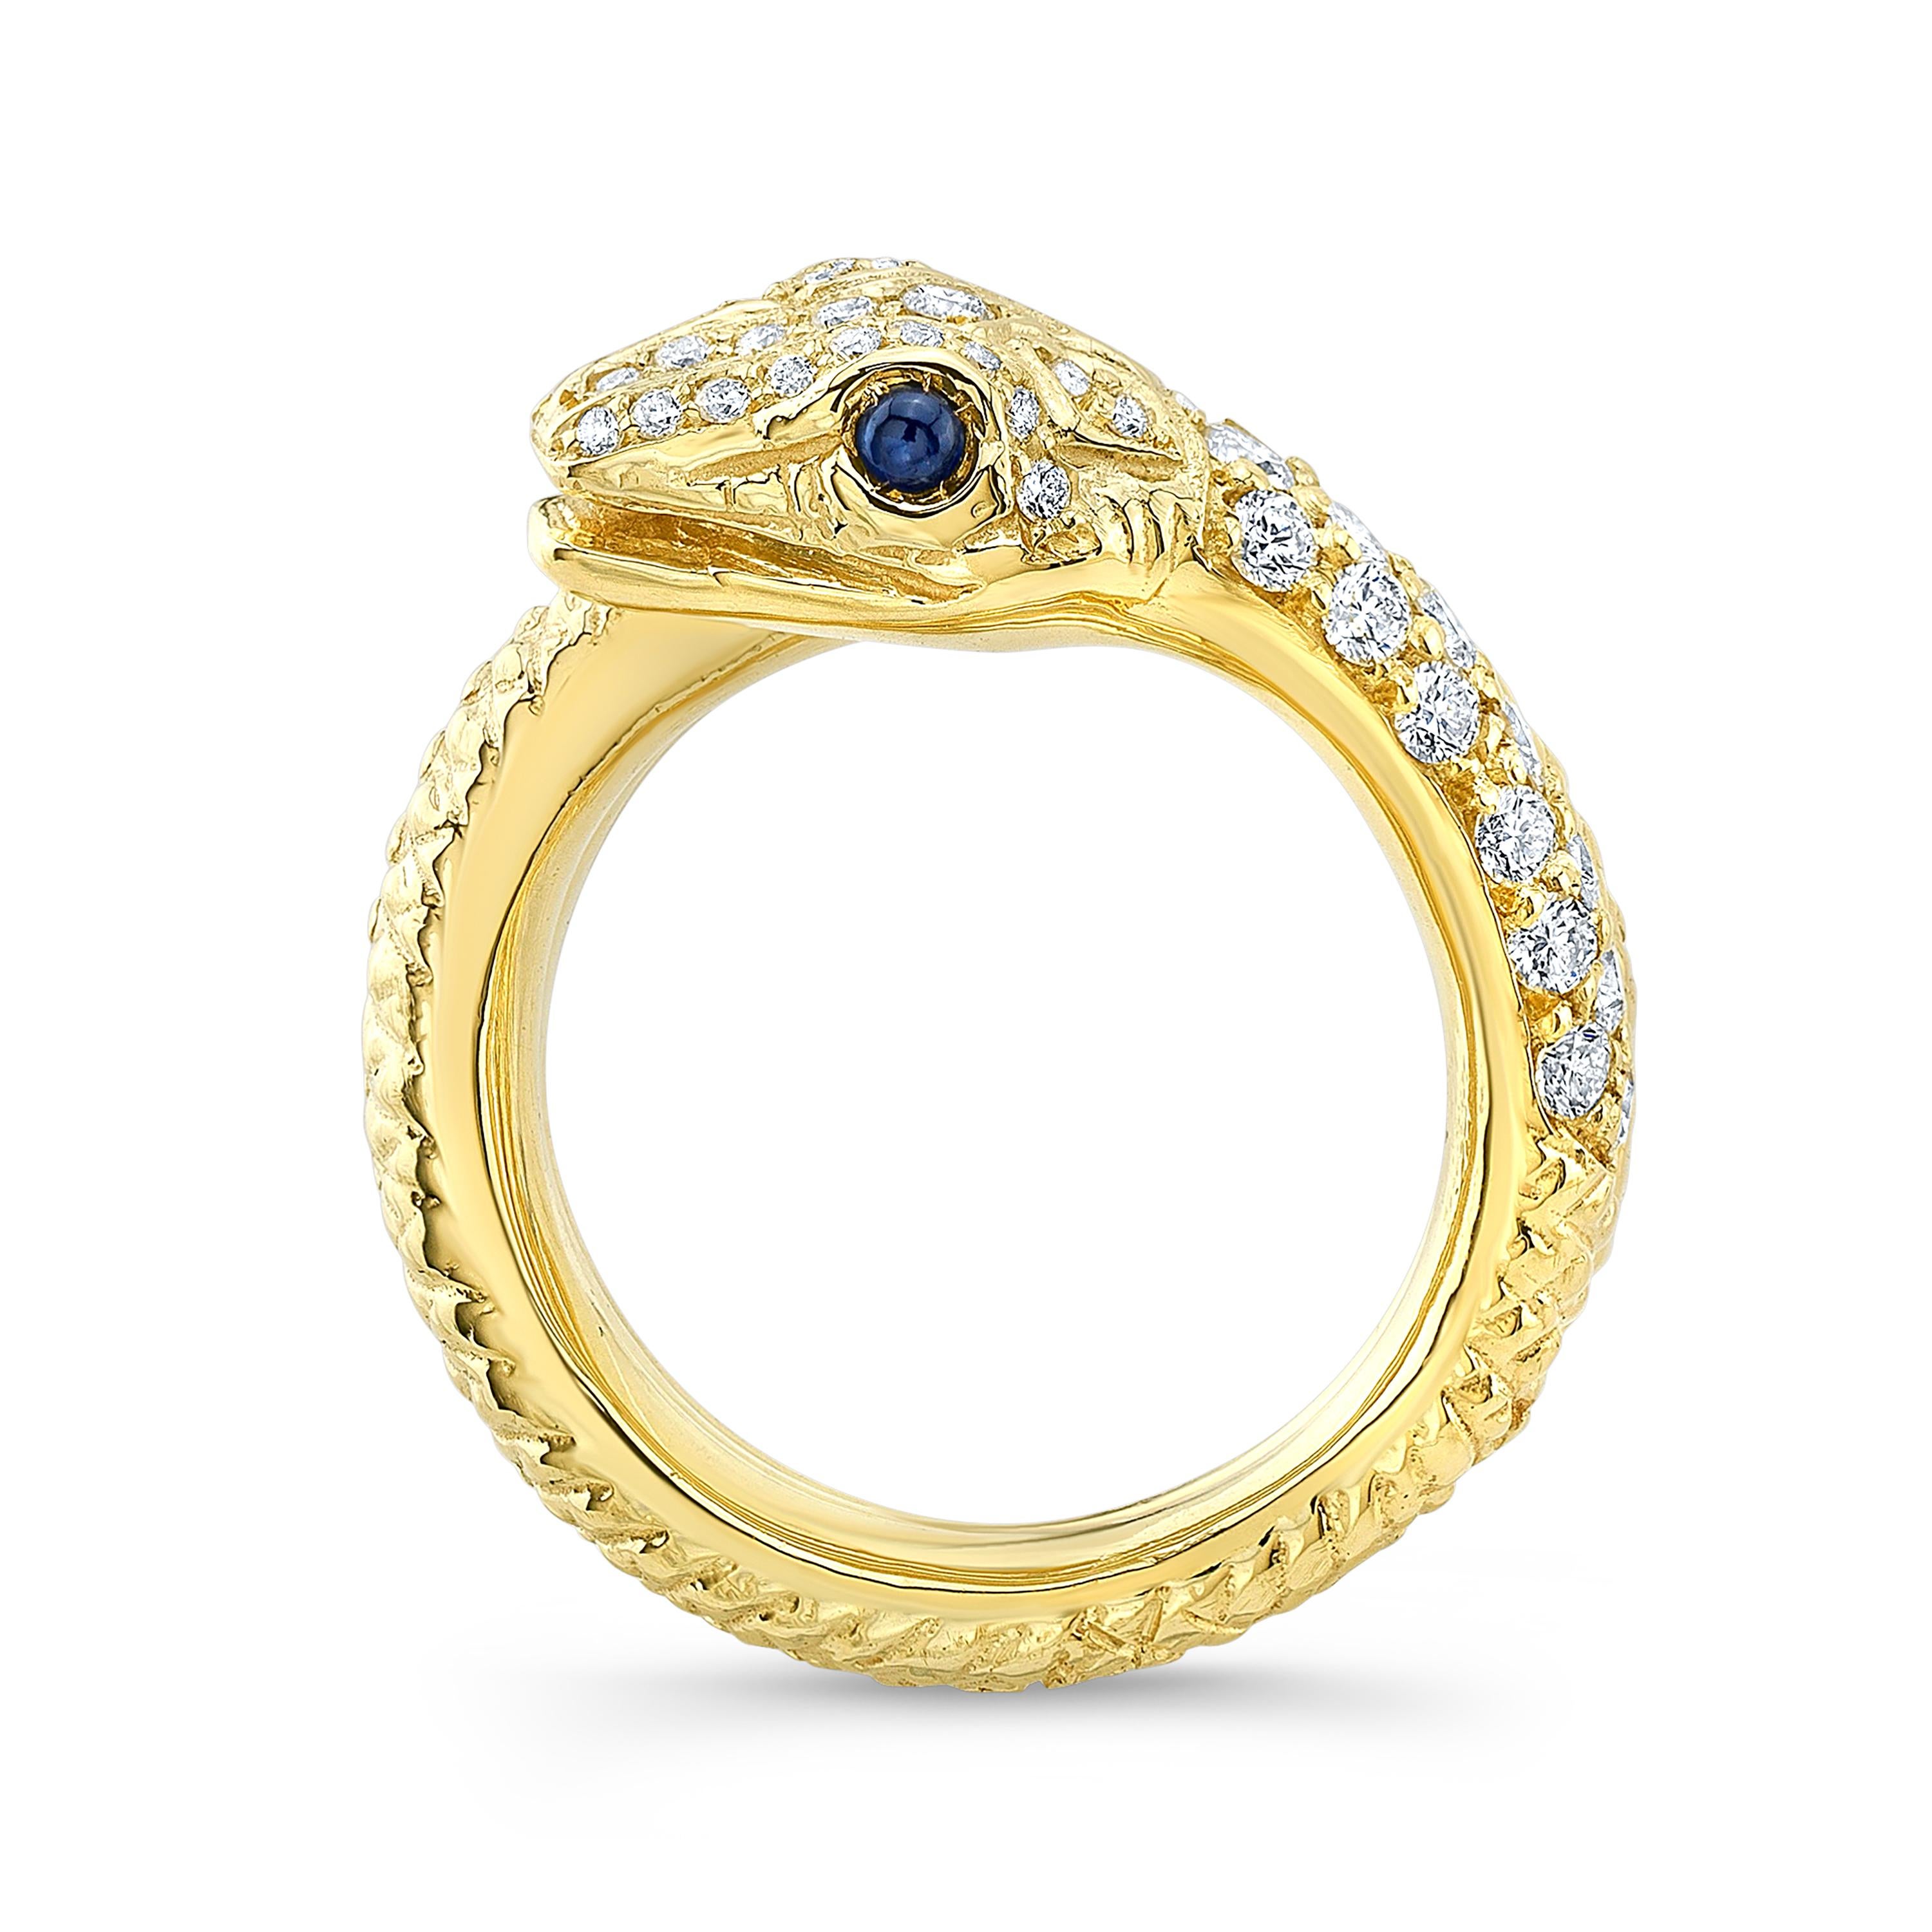 Amy's 18K-yellow gold, diamond and sapphire serpent ring 'Noah' is a fabulous replica of this lovely animal in nature. This contemporary serpent ring was handmade in 2019 by Amy's skilled artisans, in 18K-yellow gold with 1.12ct. full cut, Vs,